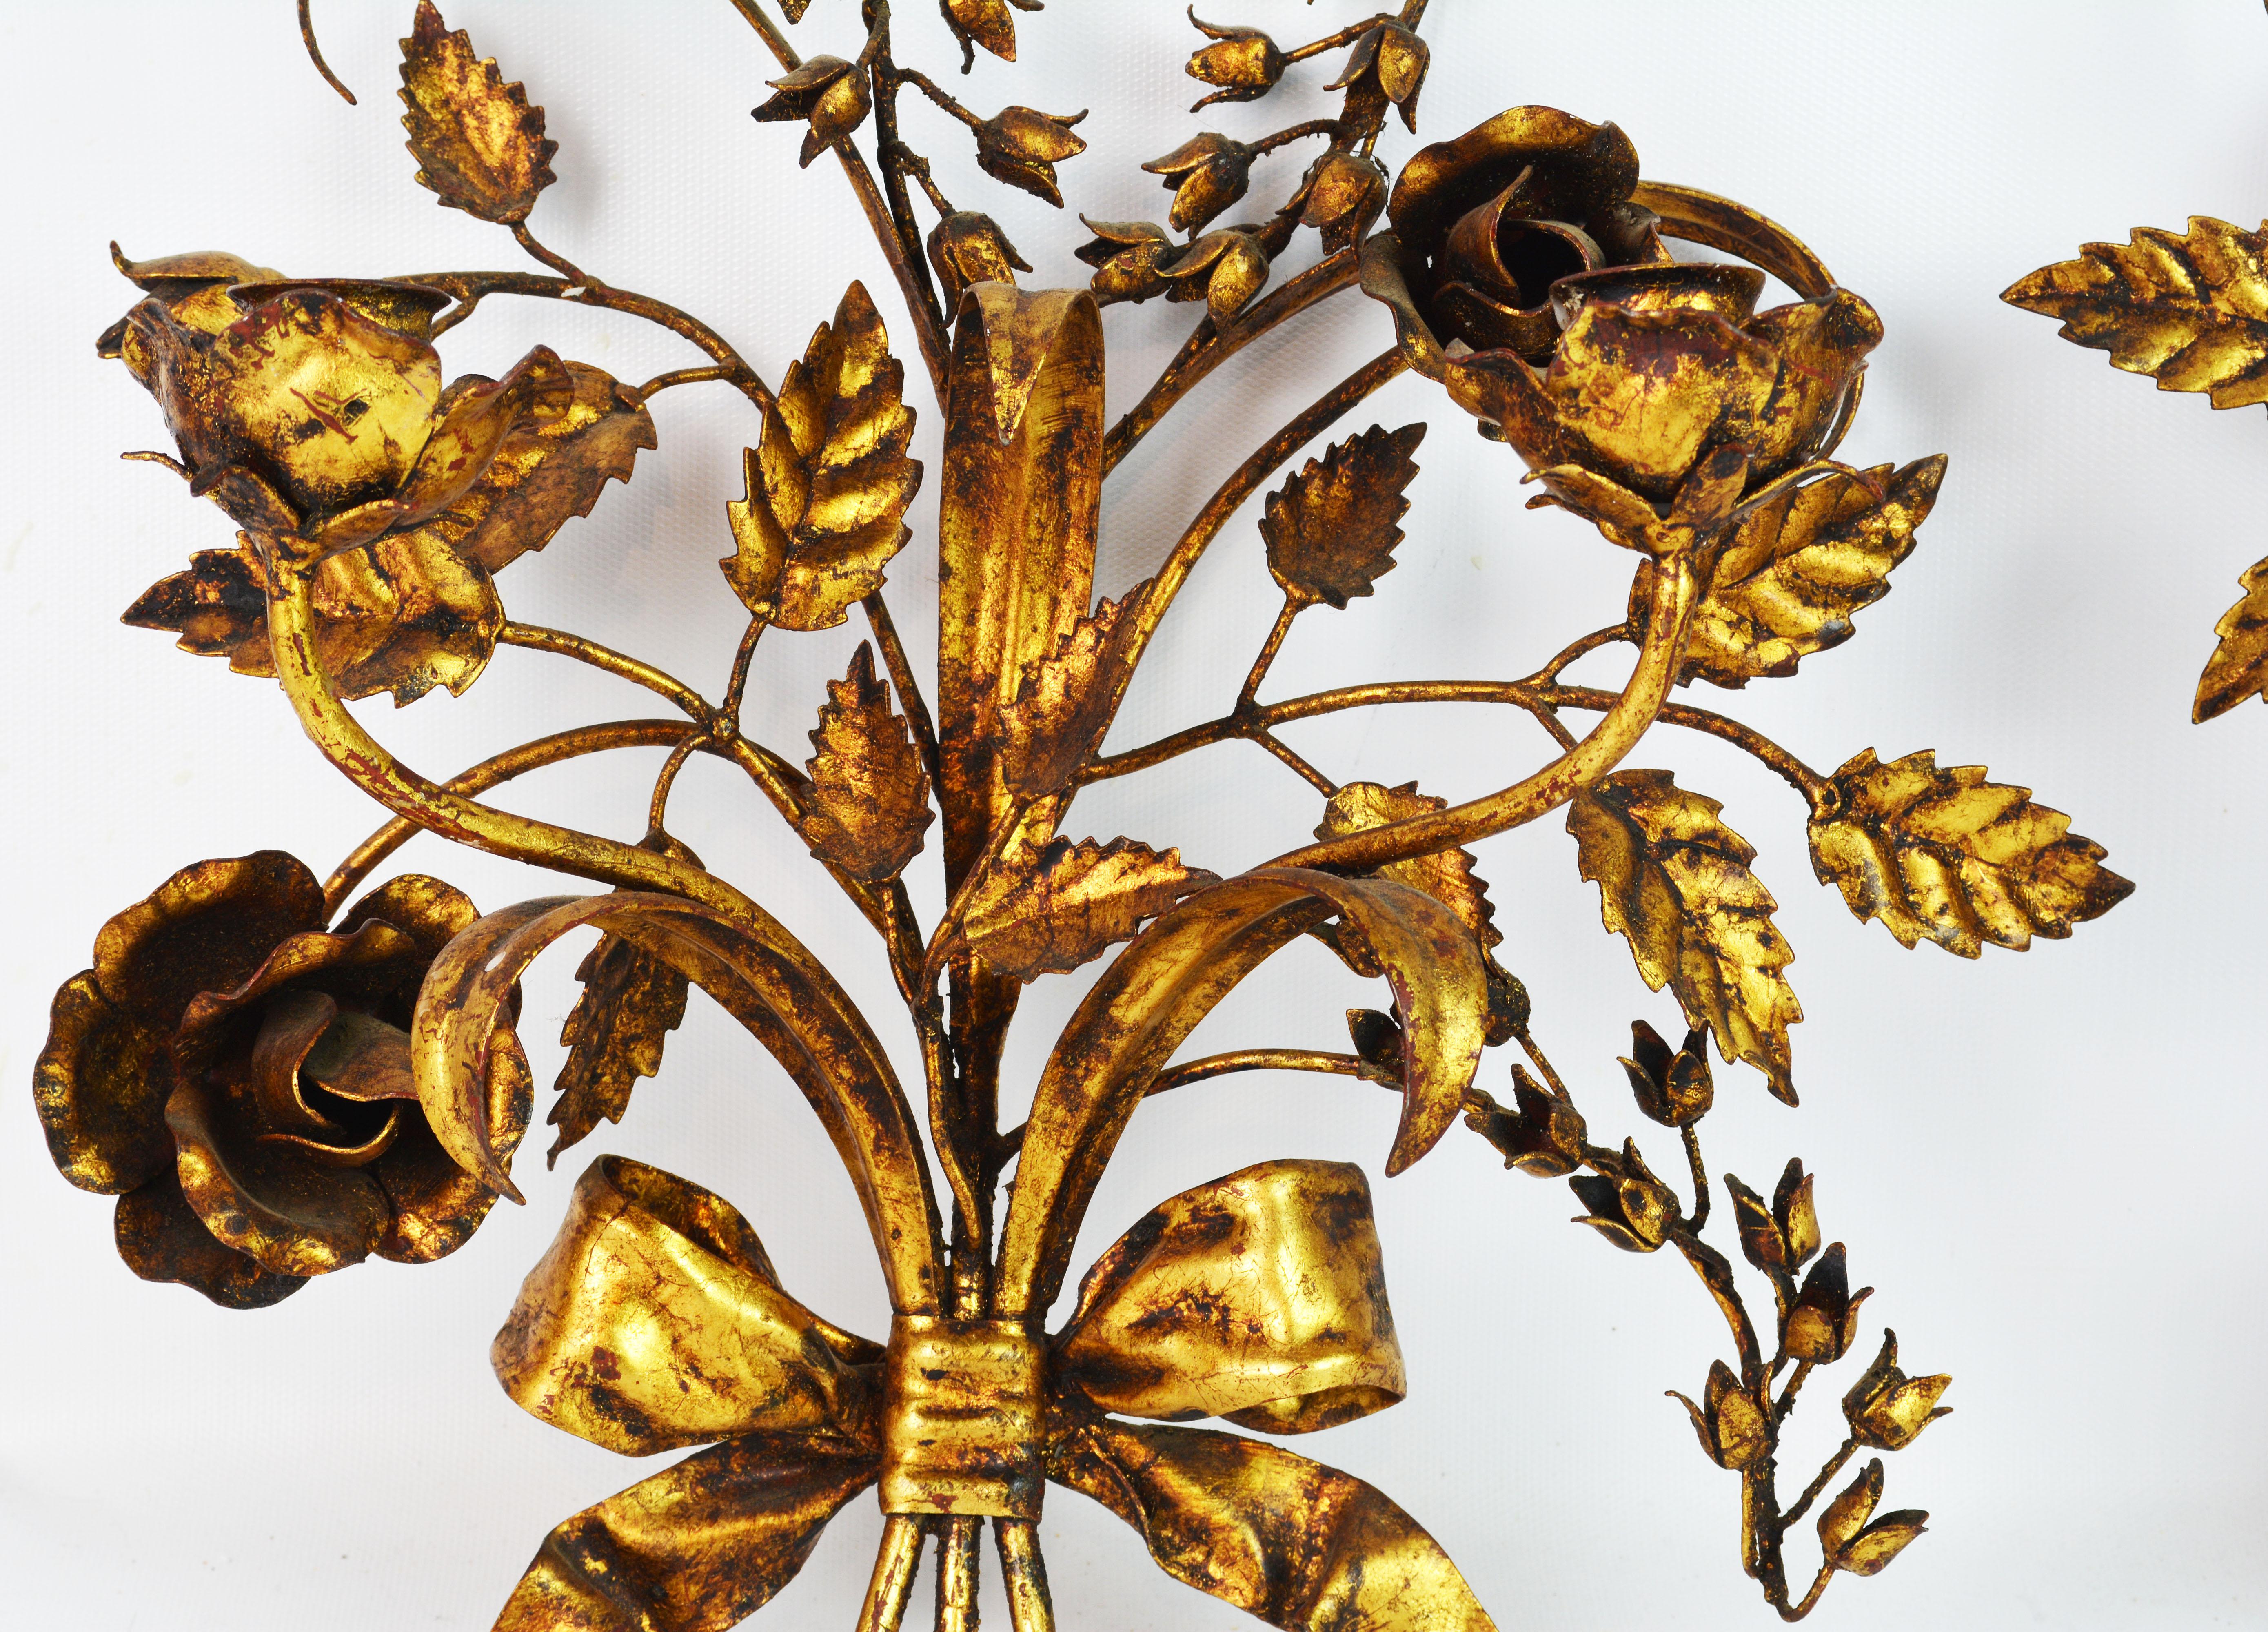 French Provincial Pair of Two-Arm Midcentury Italian Gilt Tole Flower Sconces with Ribbons